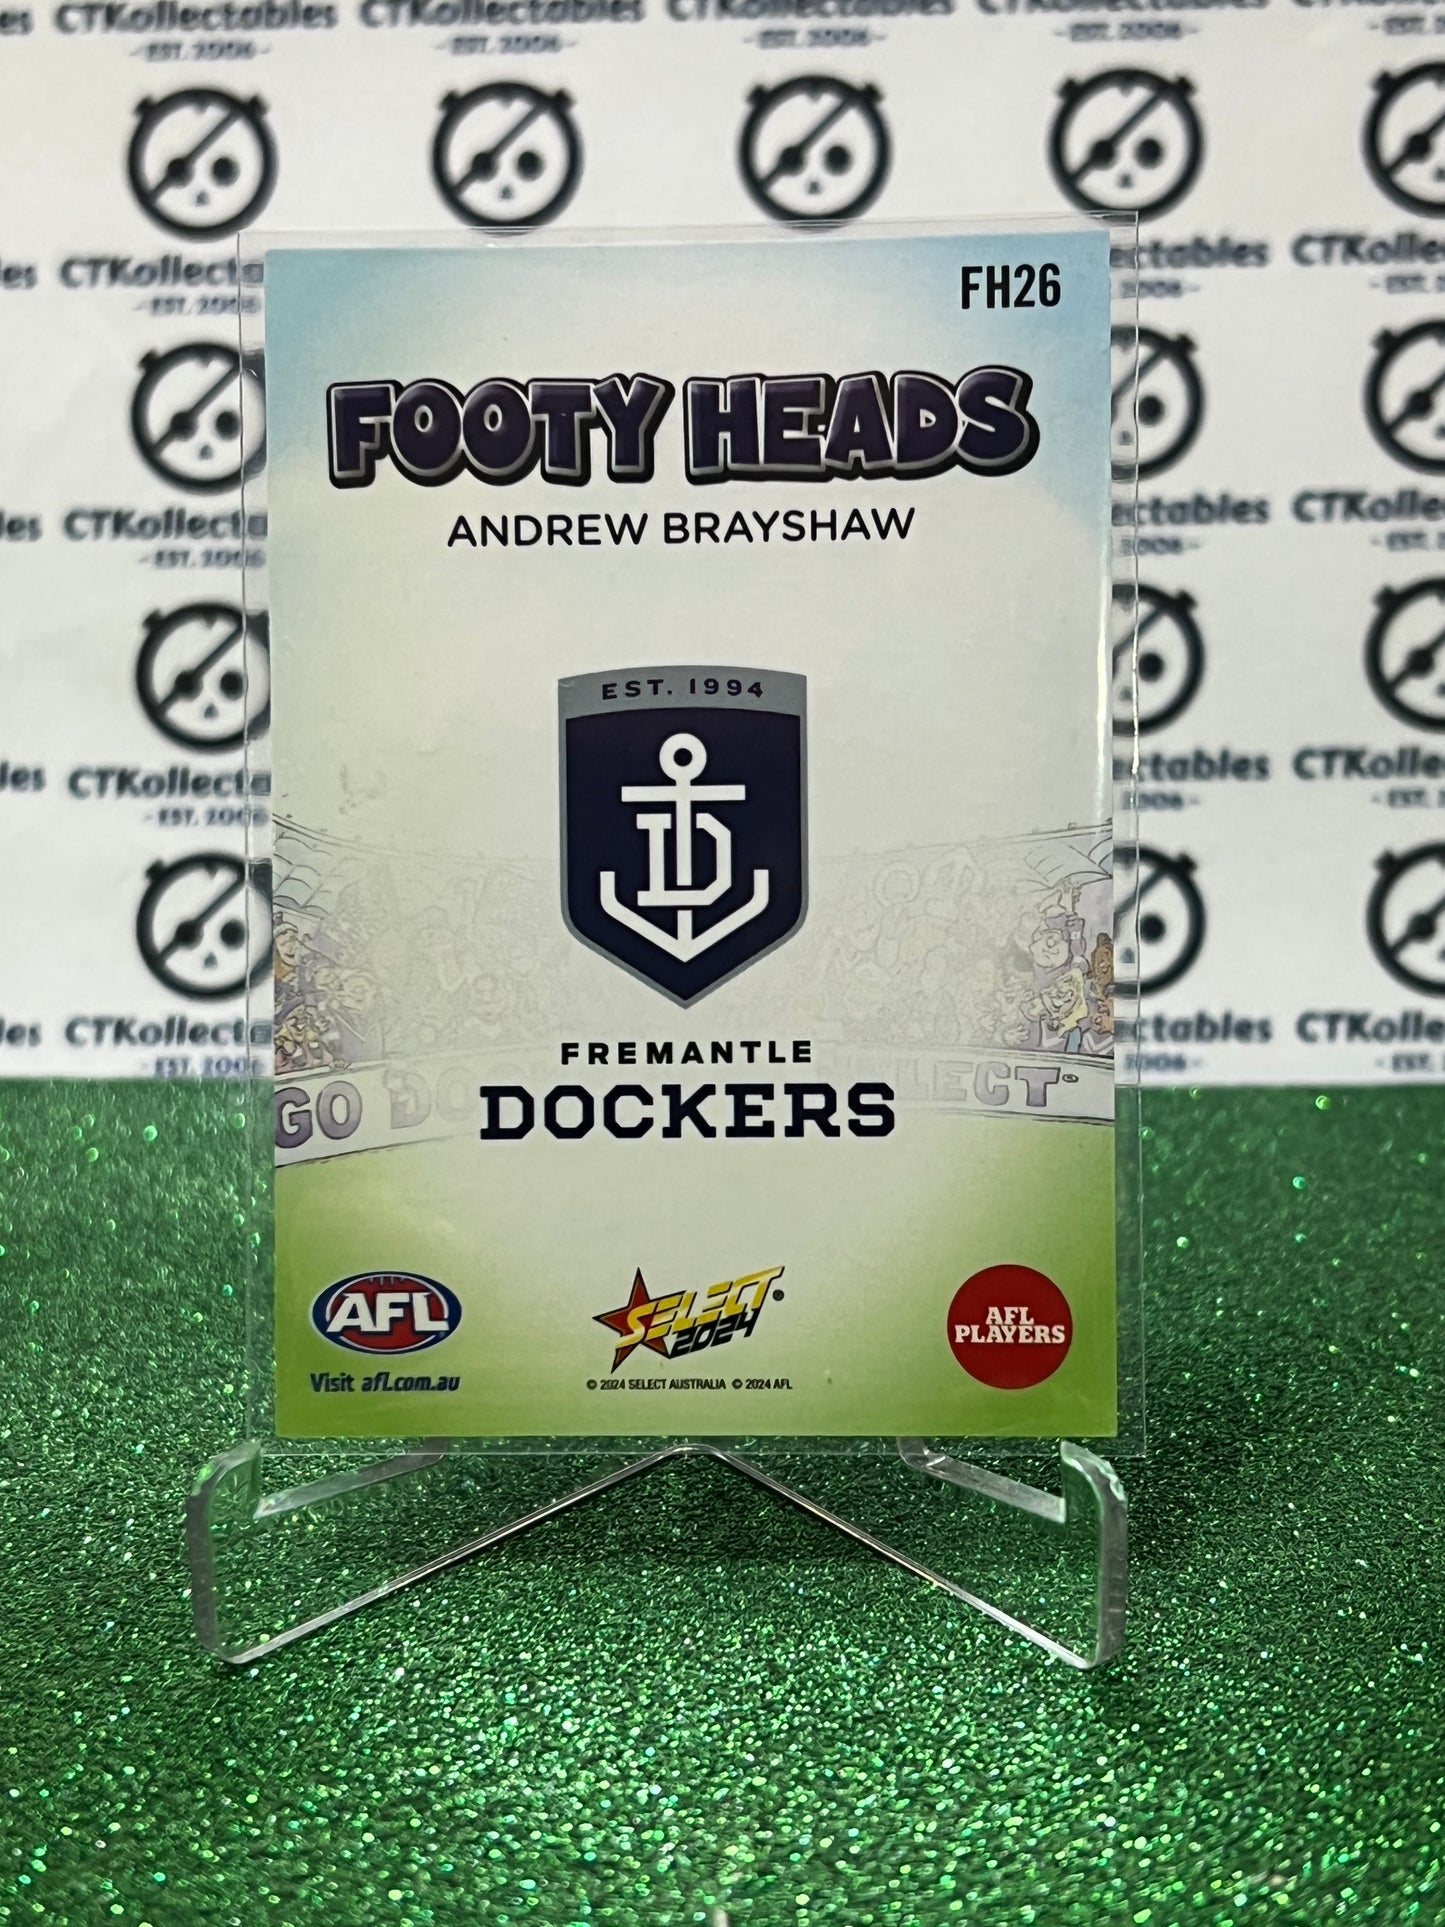 2024 AFL SELECT FOOTY STARS ANDREW BRAYSHAW # FH26 FOOTY HEADS FREMANTLE DOCKERS